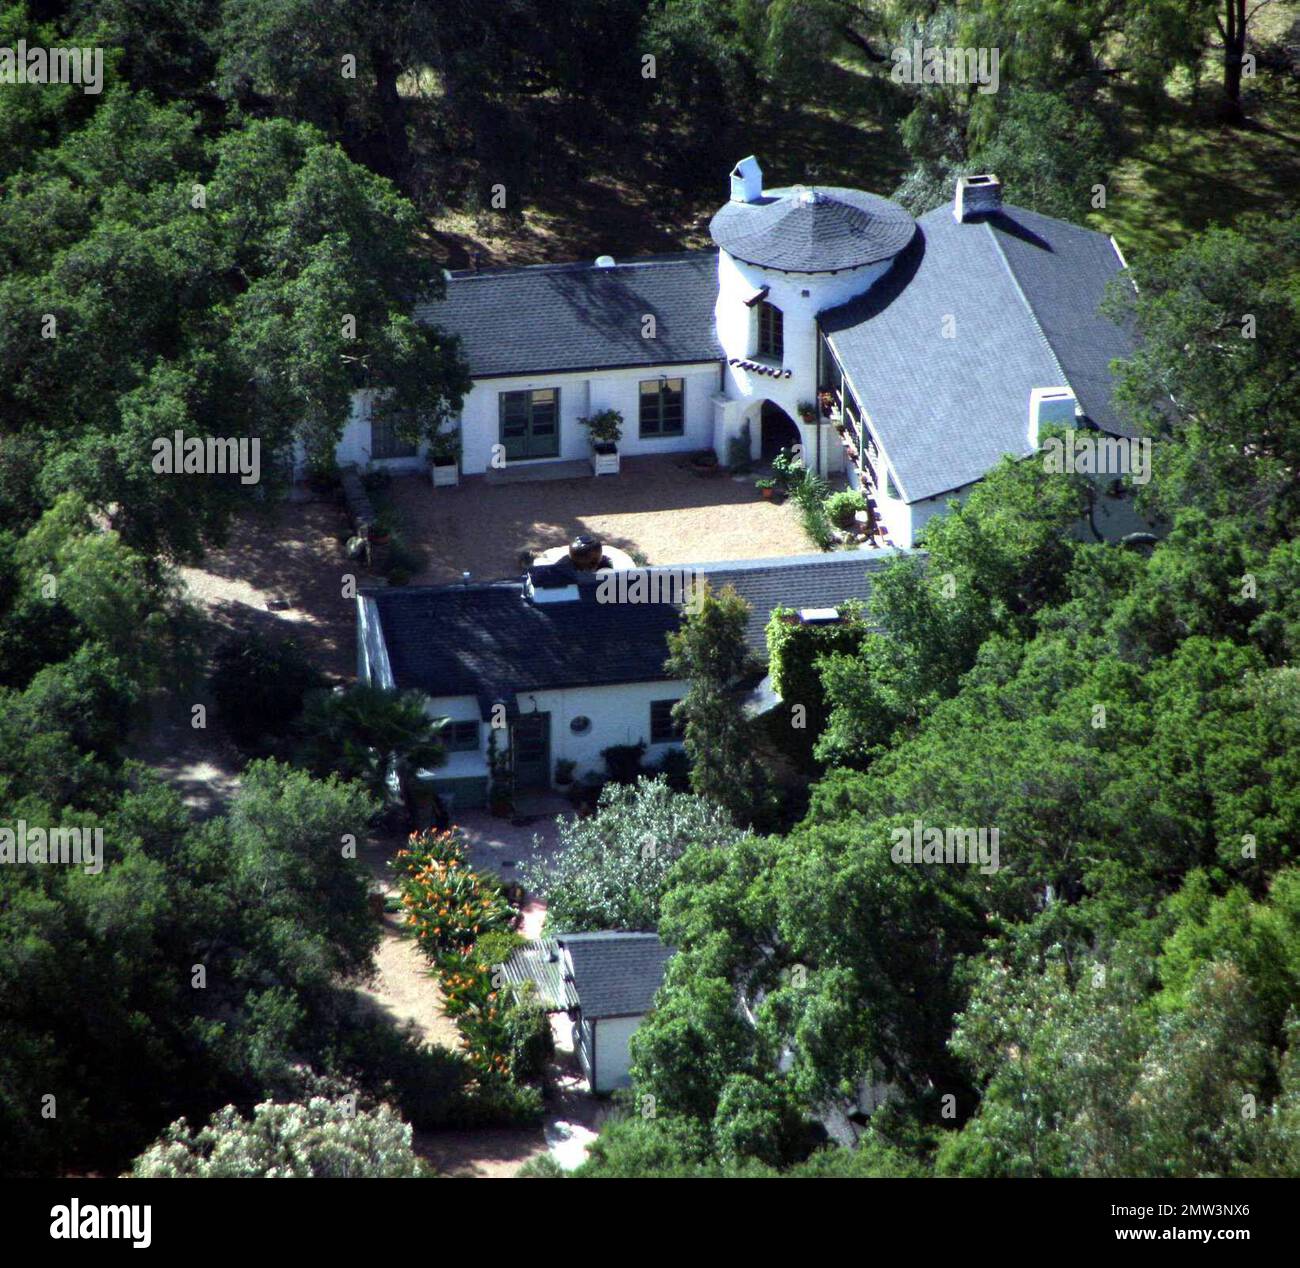 Exclusive!! This is reportedly Reese Witherspoon's new romantic retreat with Jake Gylenhaal. The lovenest is situated in a private community in the heart of the Ojai valley. Originally built by famed architect, Wallace Neff, the home has been  profesionally re-designed by Kathryn Ireland. The home has four bedrooms, three baths and a new master suite. It is nestled amongst trees and sits on more than six acres in an equestrian area. It was listed at $6,950,000. Ojai, Ca. 3/31/08. Stock Photo